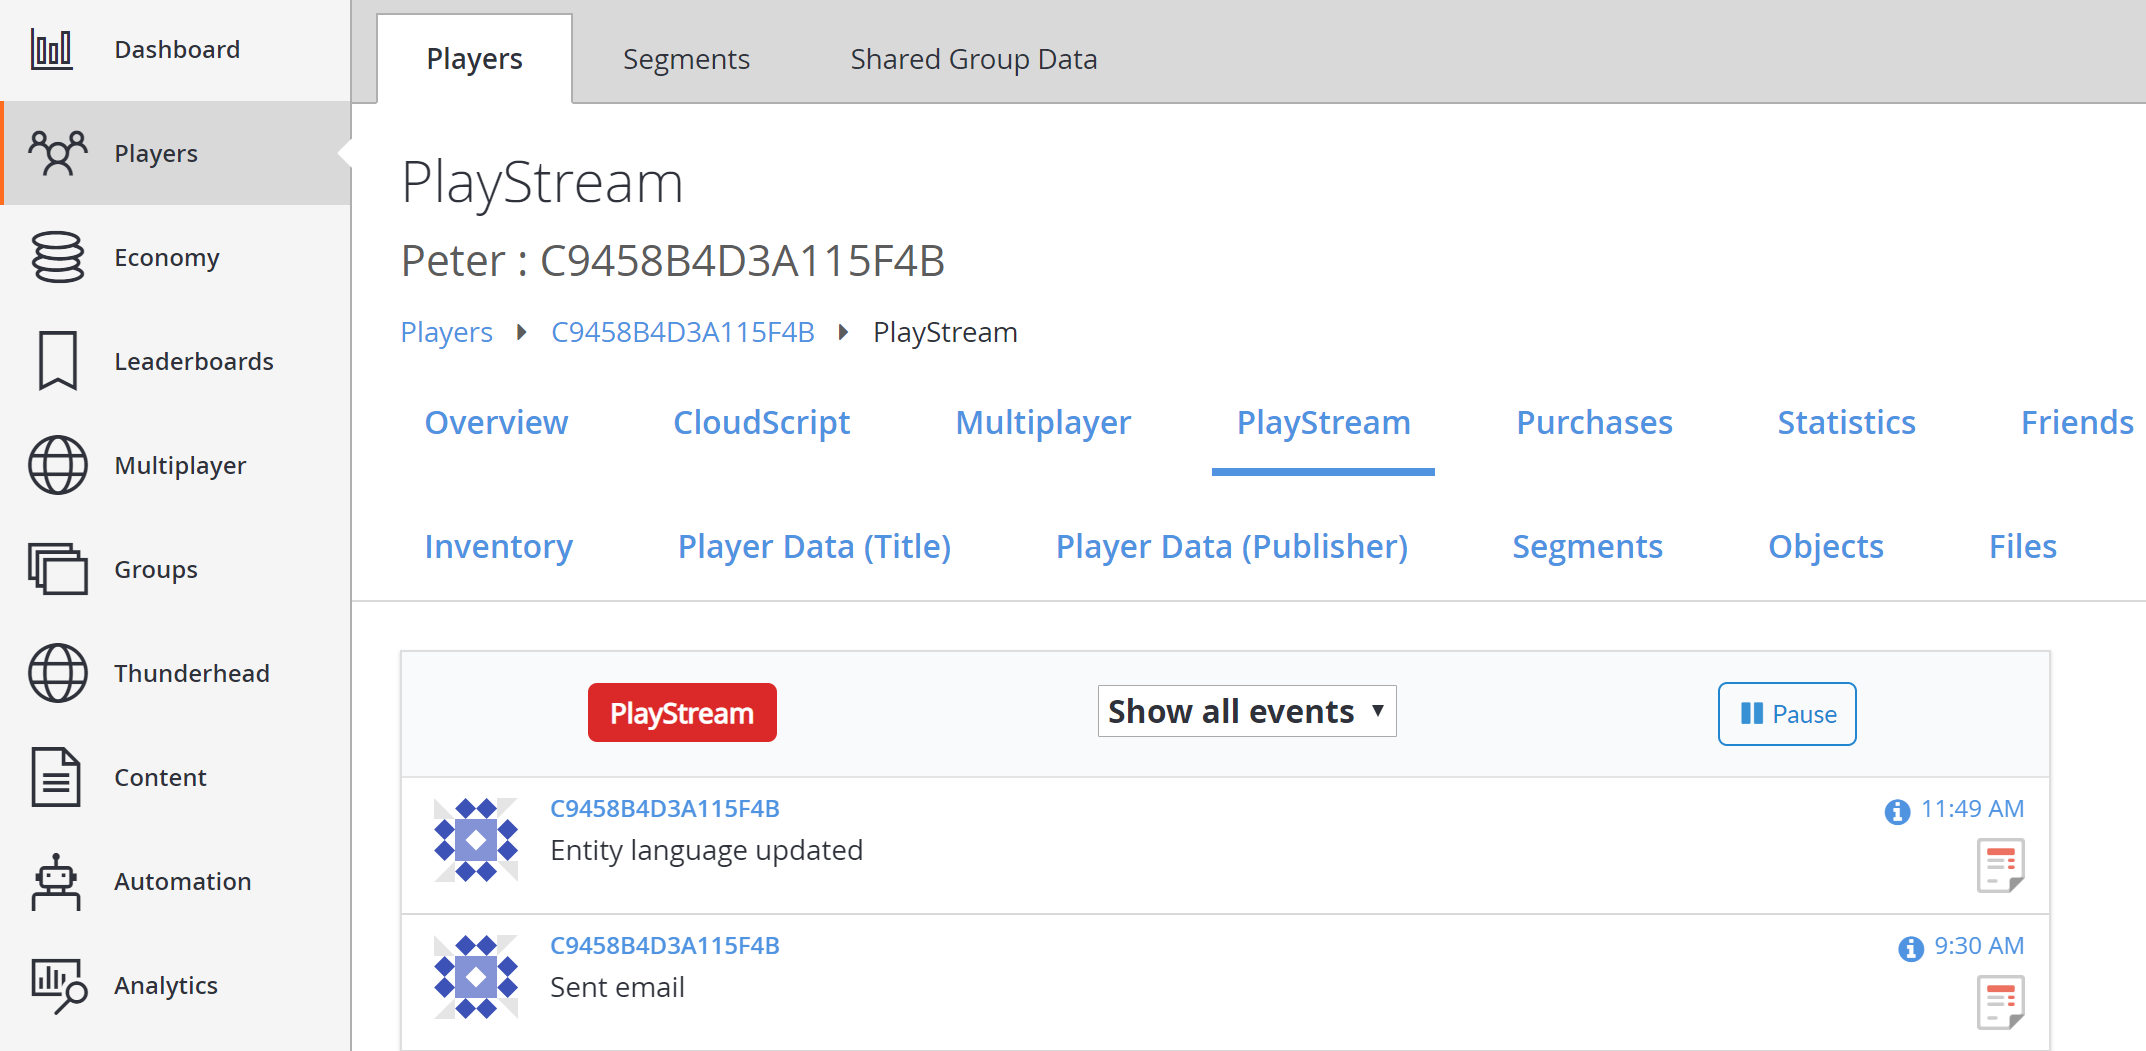 Game Manager – Spieler – PlayStream – Entity Language Updated-Ereignis